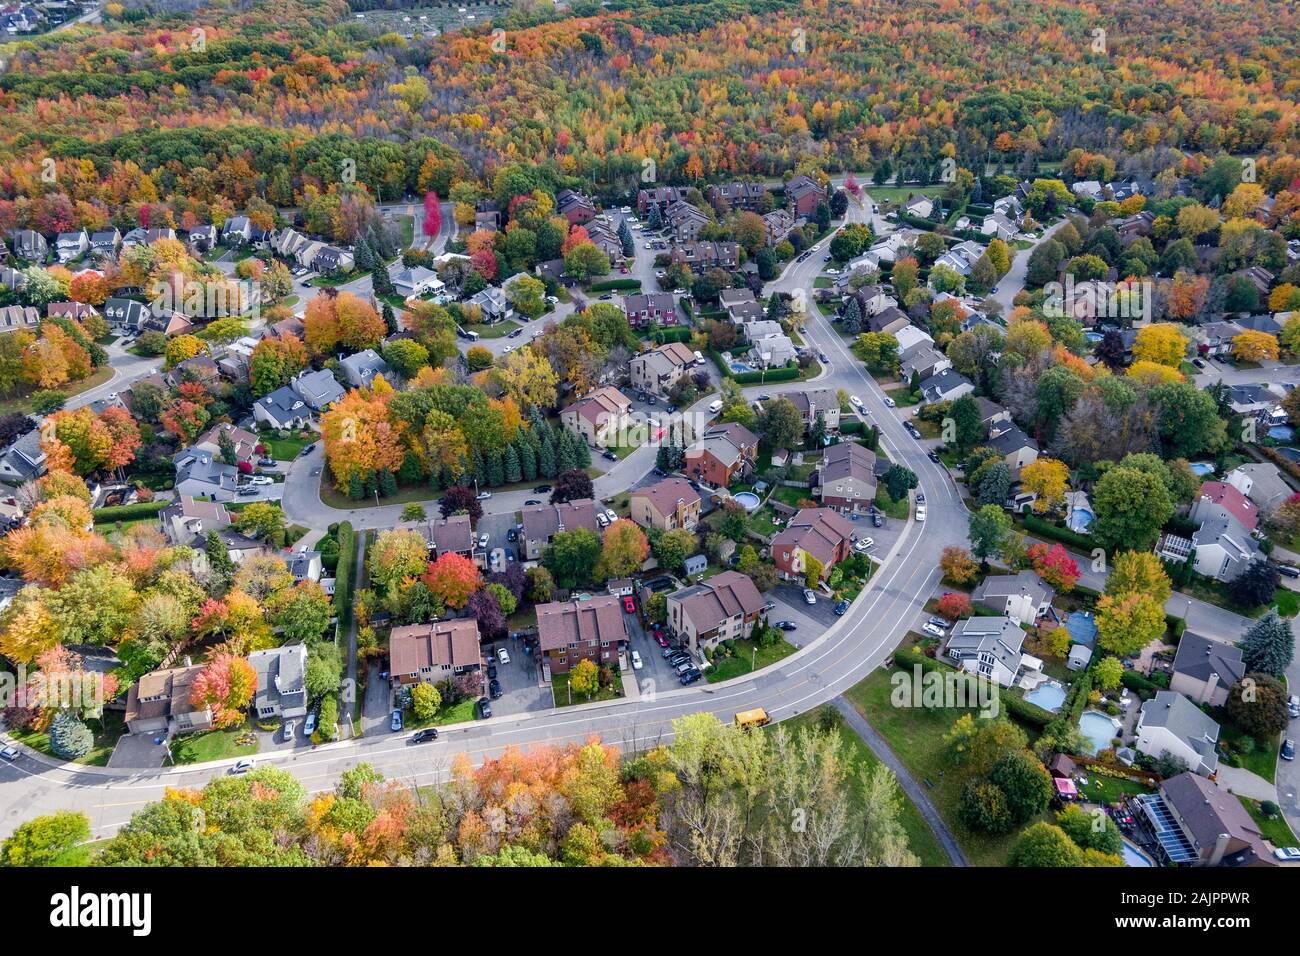 Aerial view of residential neighbourhood showing trees changing color during fall season in Montreal, Quebec, Canada. Stock Photo